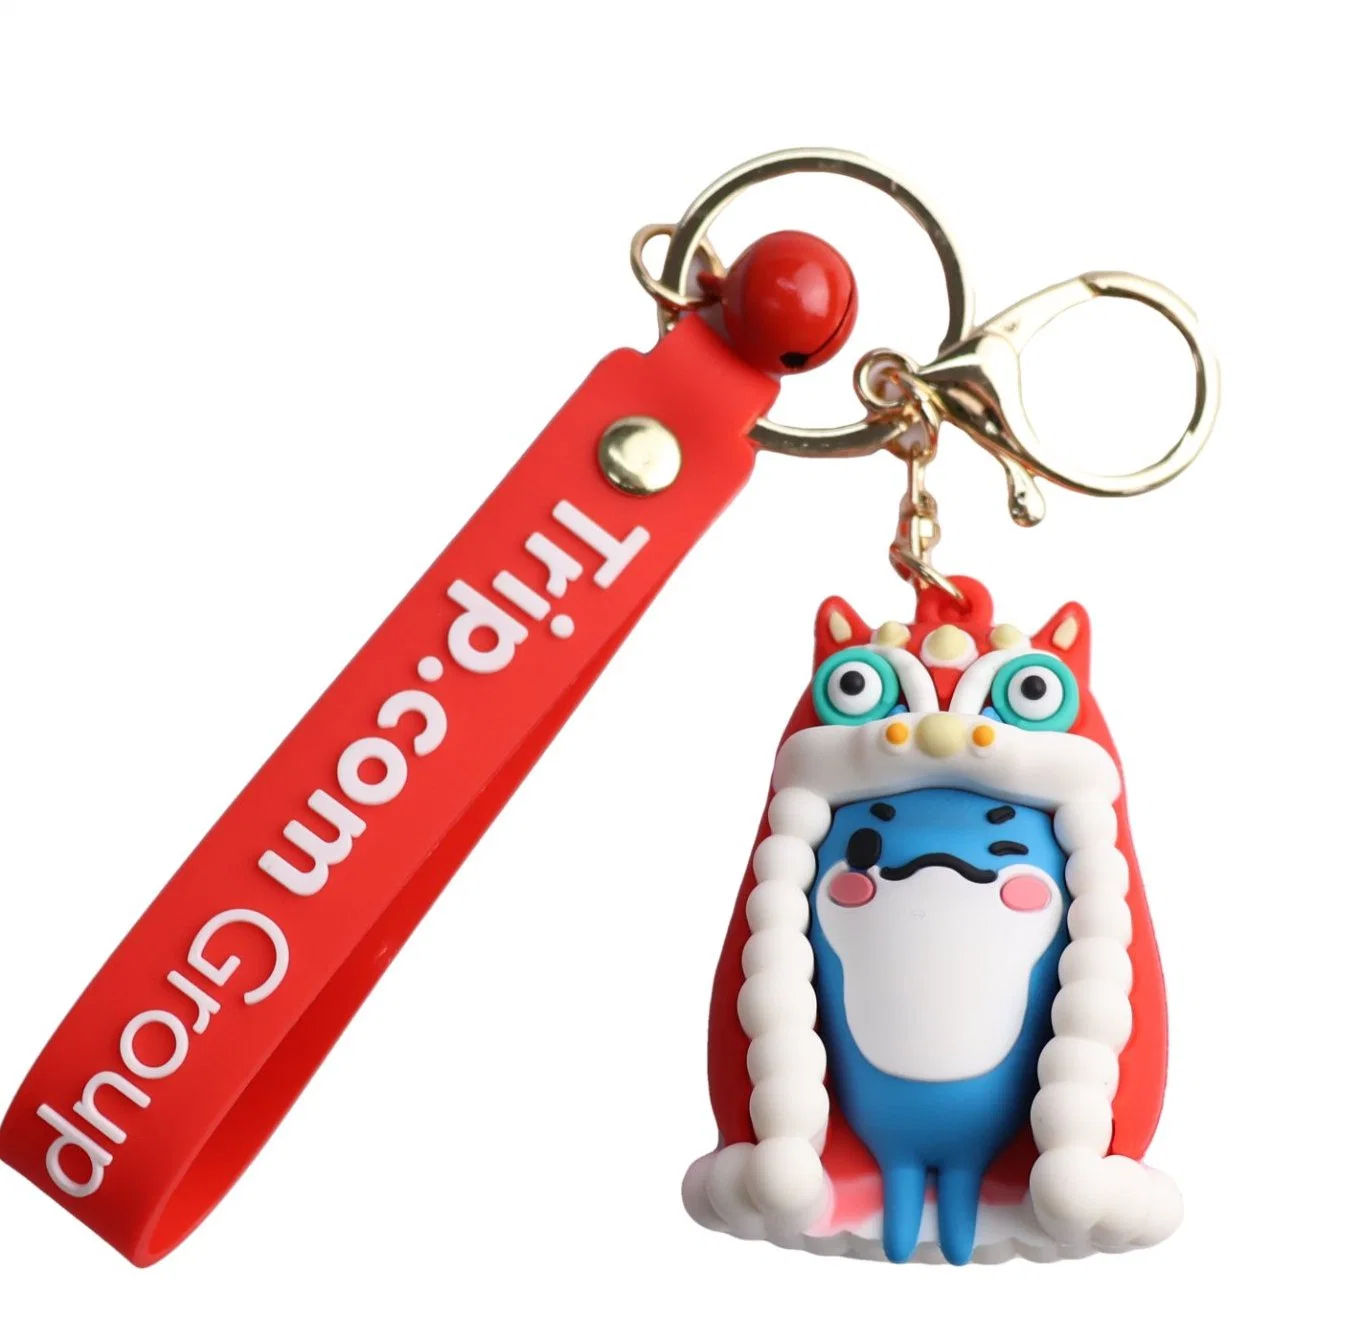 Wholesale 3D Cartoon Anime Figure Keychains with PVC Silicone Strap Custom Logo Design in Bulk for Charger Flashlight Accessories Promotion Gifts